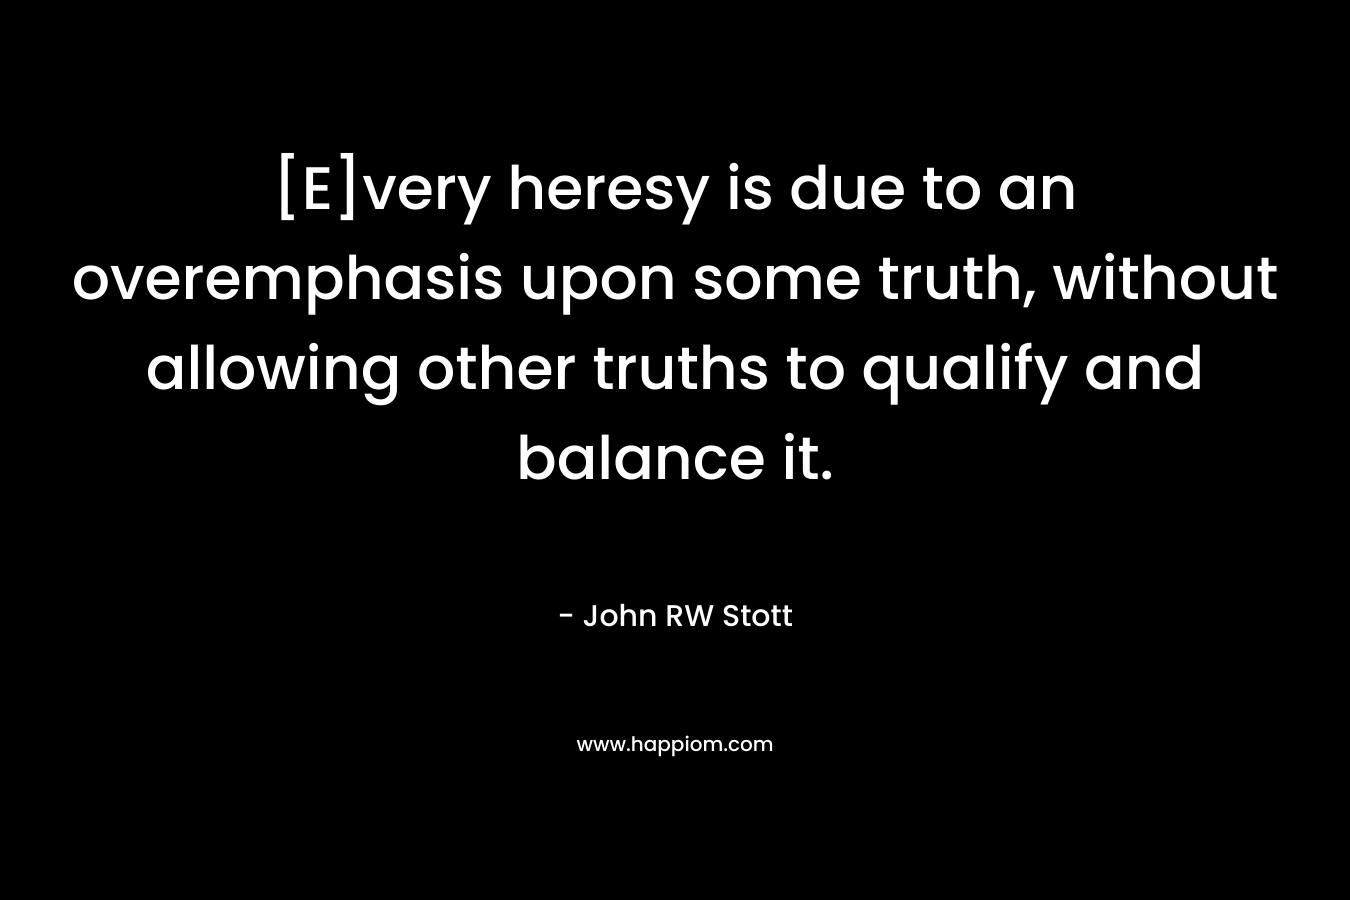 [E]very heresy is due to an overemphasis upon some truth, without allowing other truths to qualify and balance it.